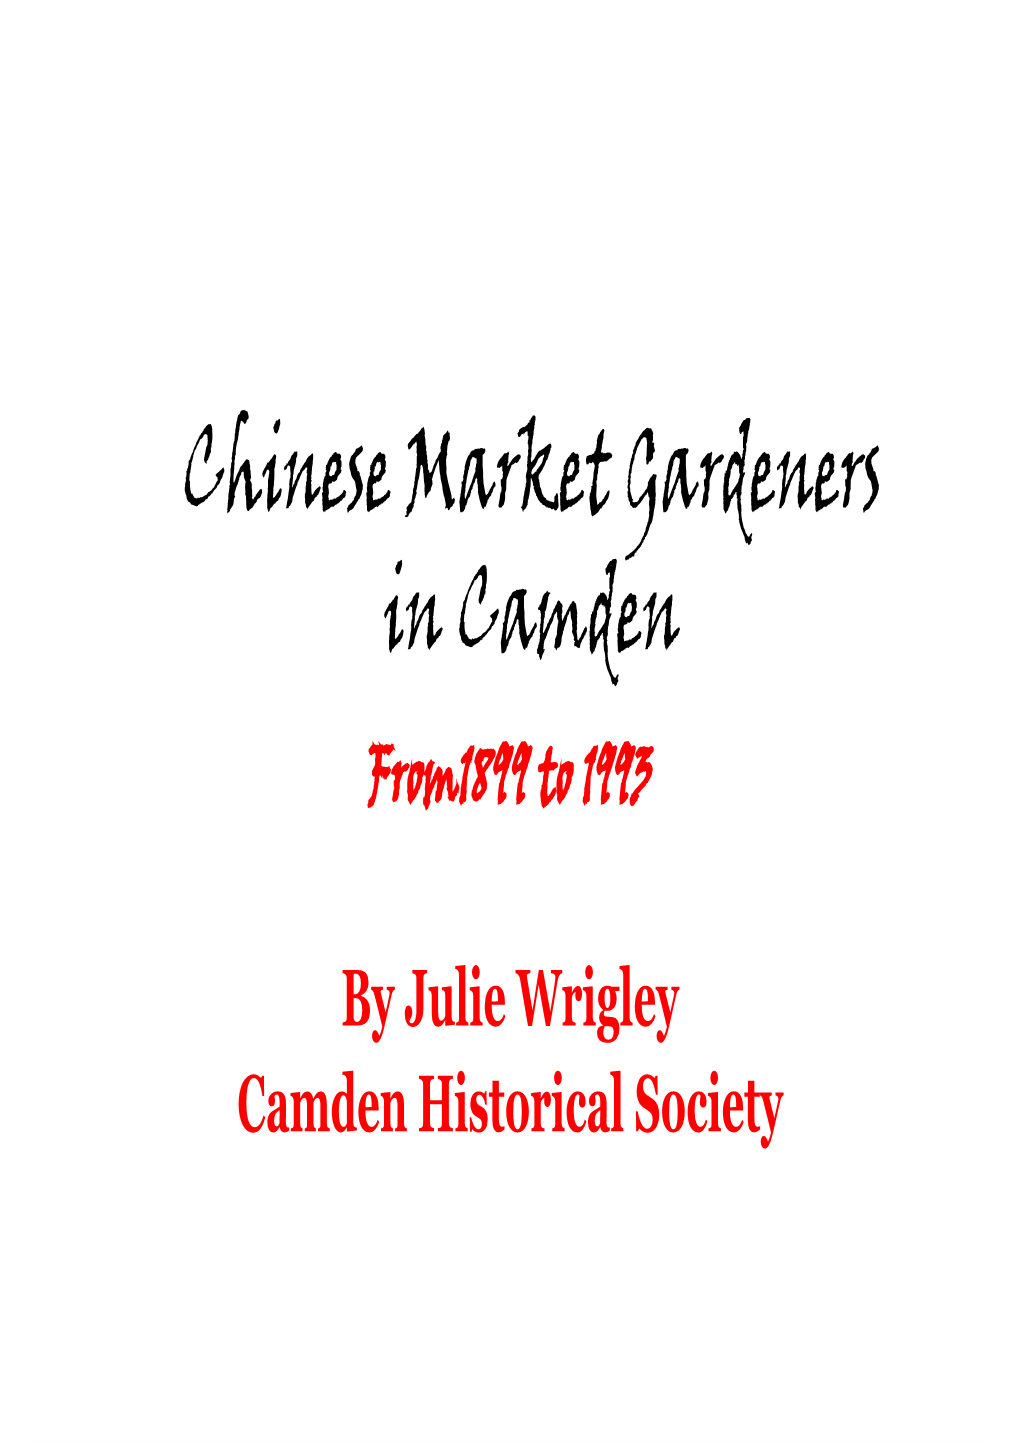 Chinese Market Gardeners in Camden From1899 to 1993